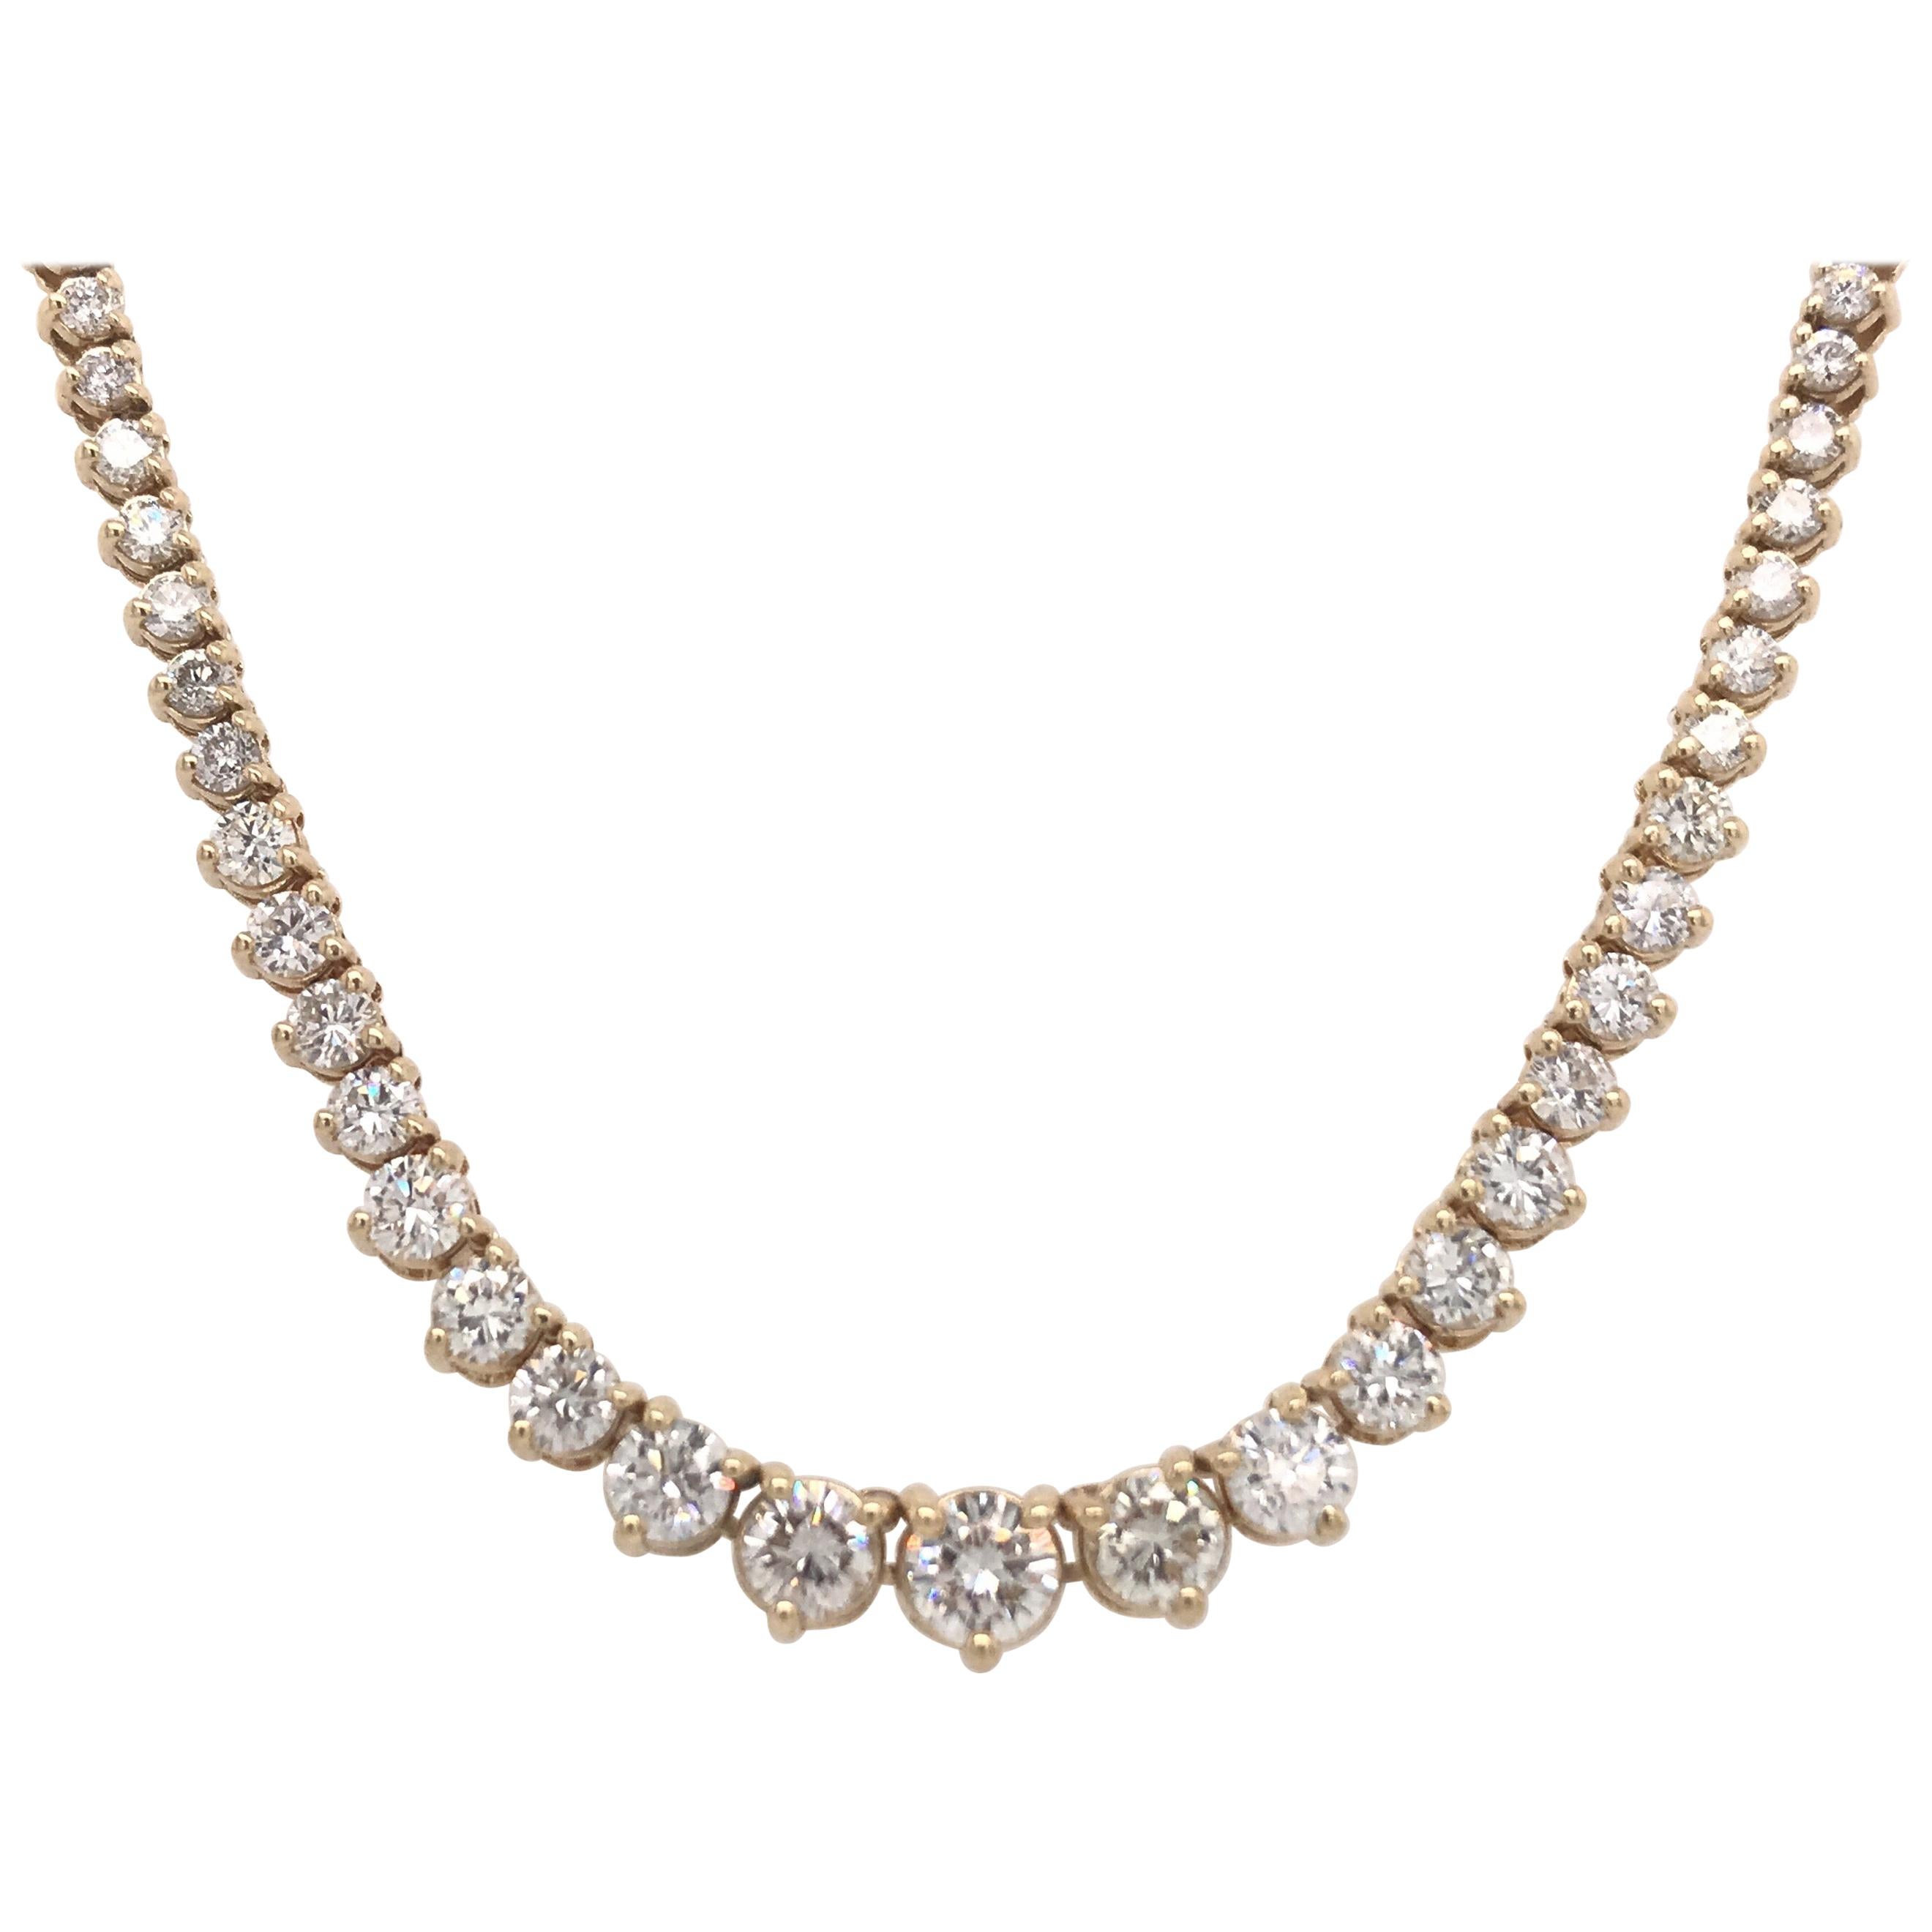 Gaia Eternity 12.2 Carat Lab-Grown Diamond Riviere Necklace in 18K White  Gold